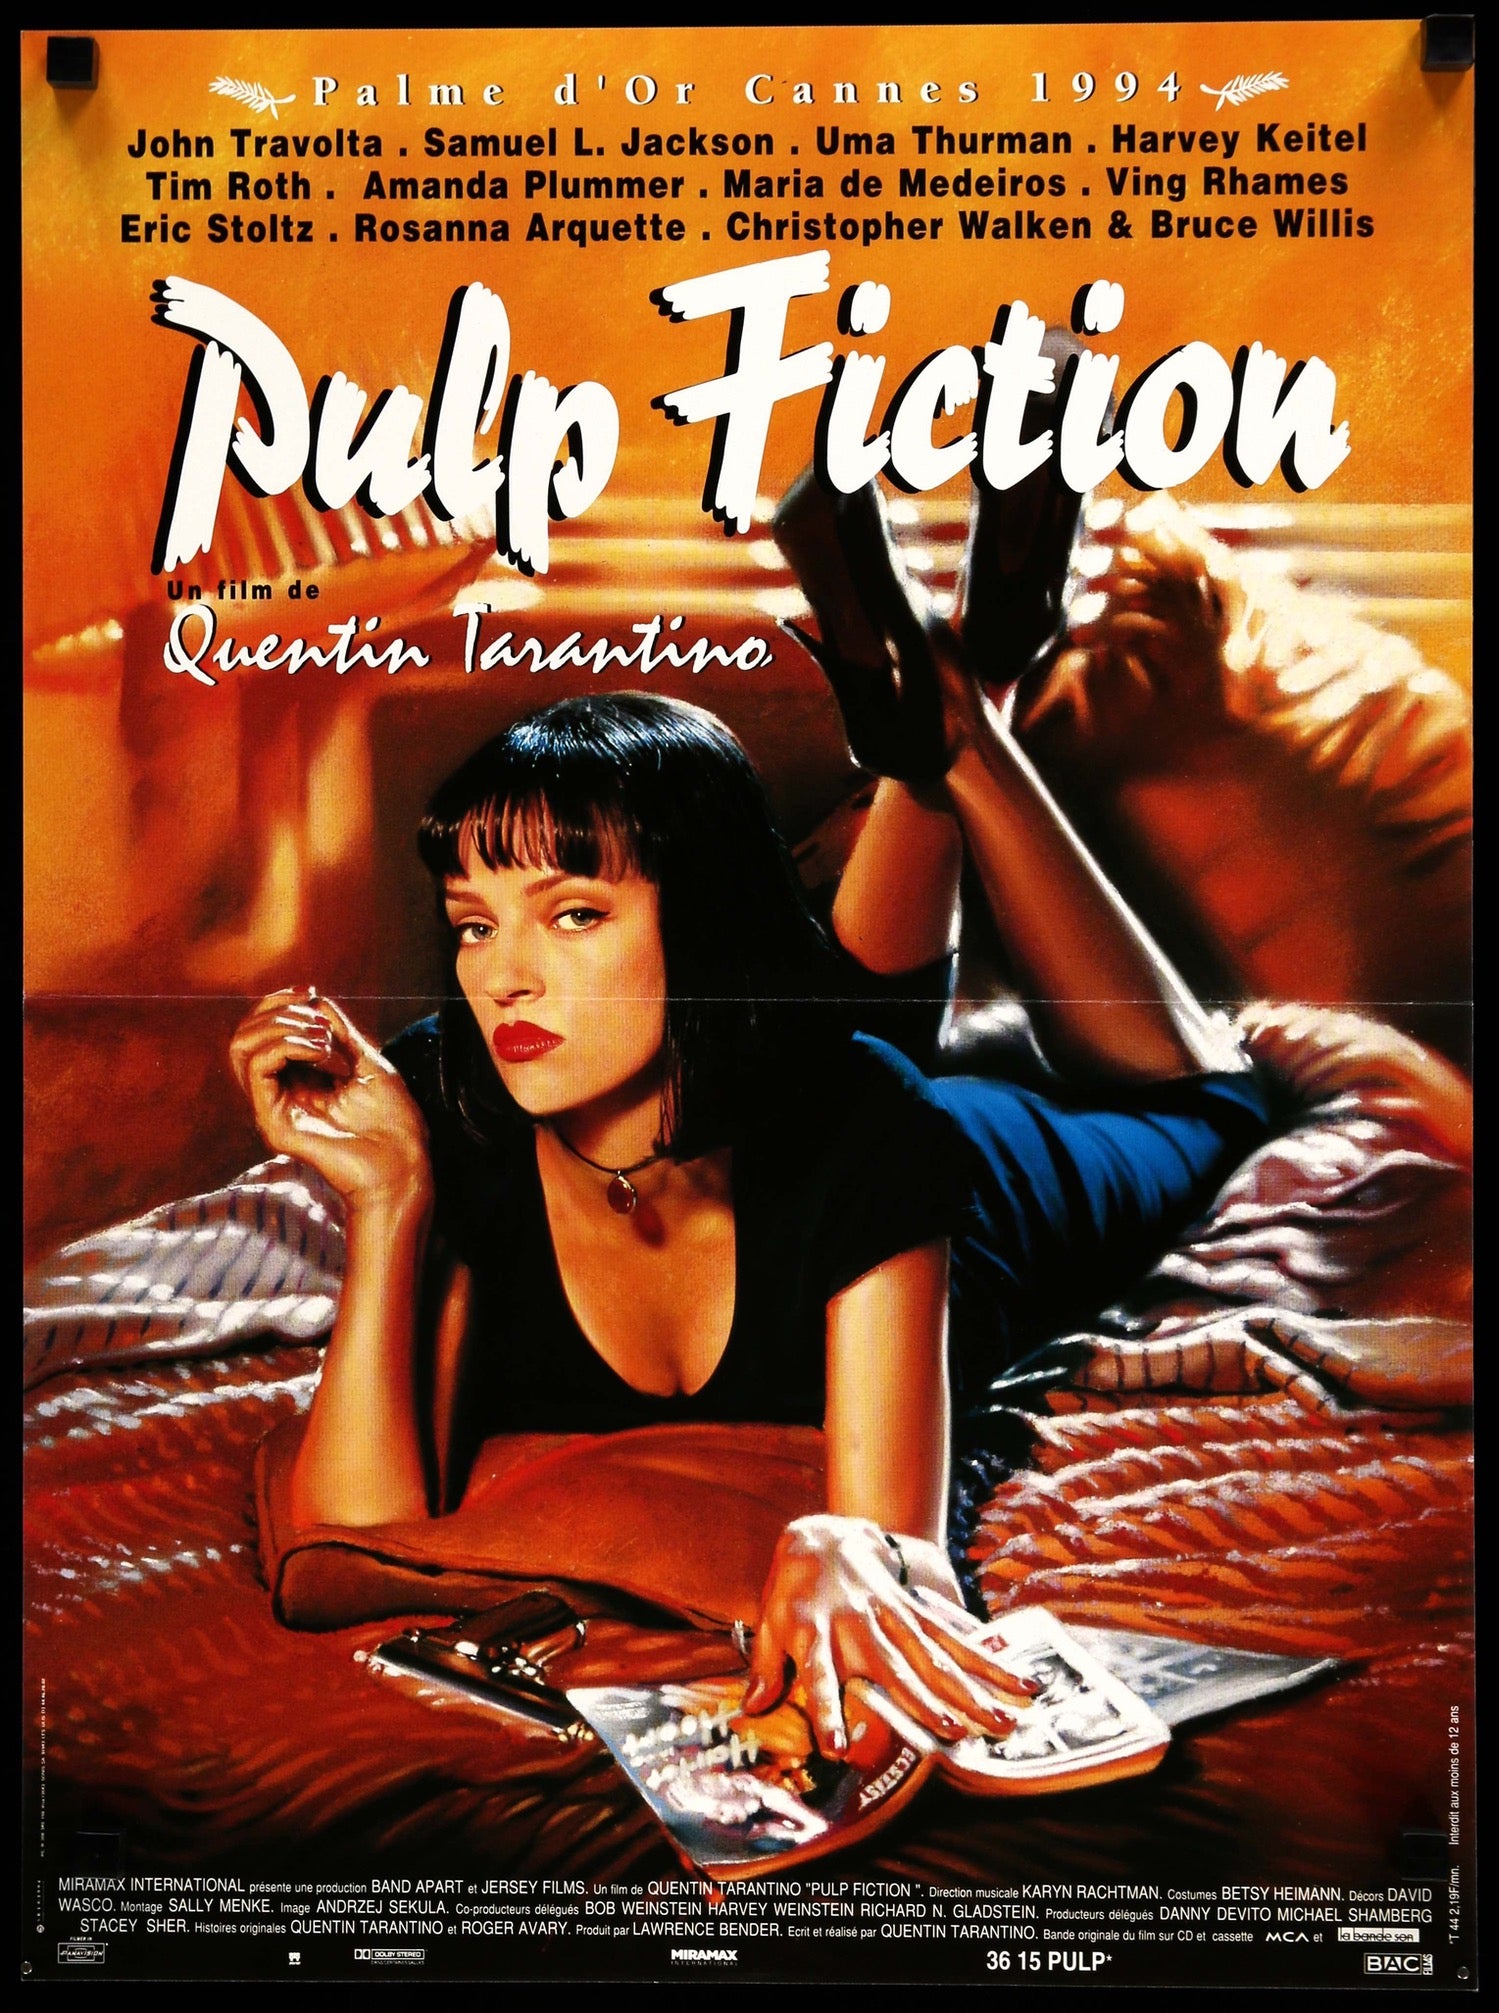  Pulp  Fiction  1994 Original French Movie Poster  